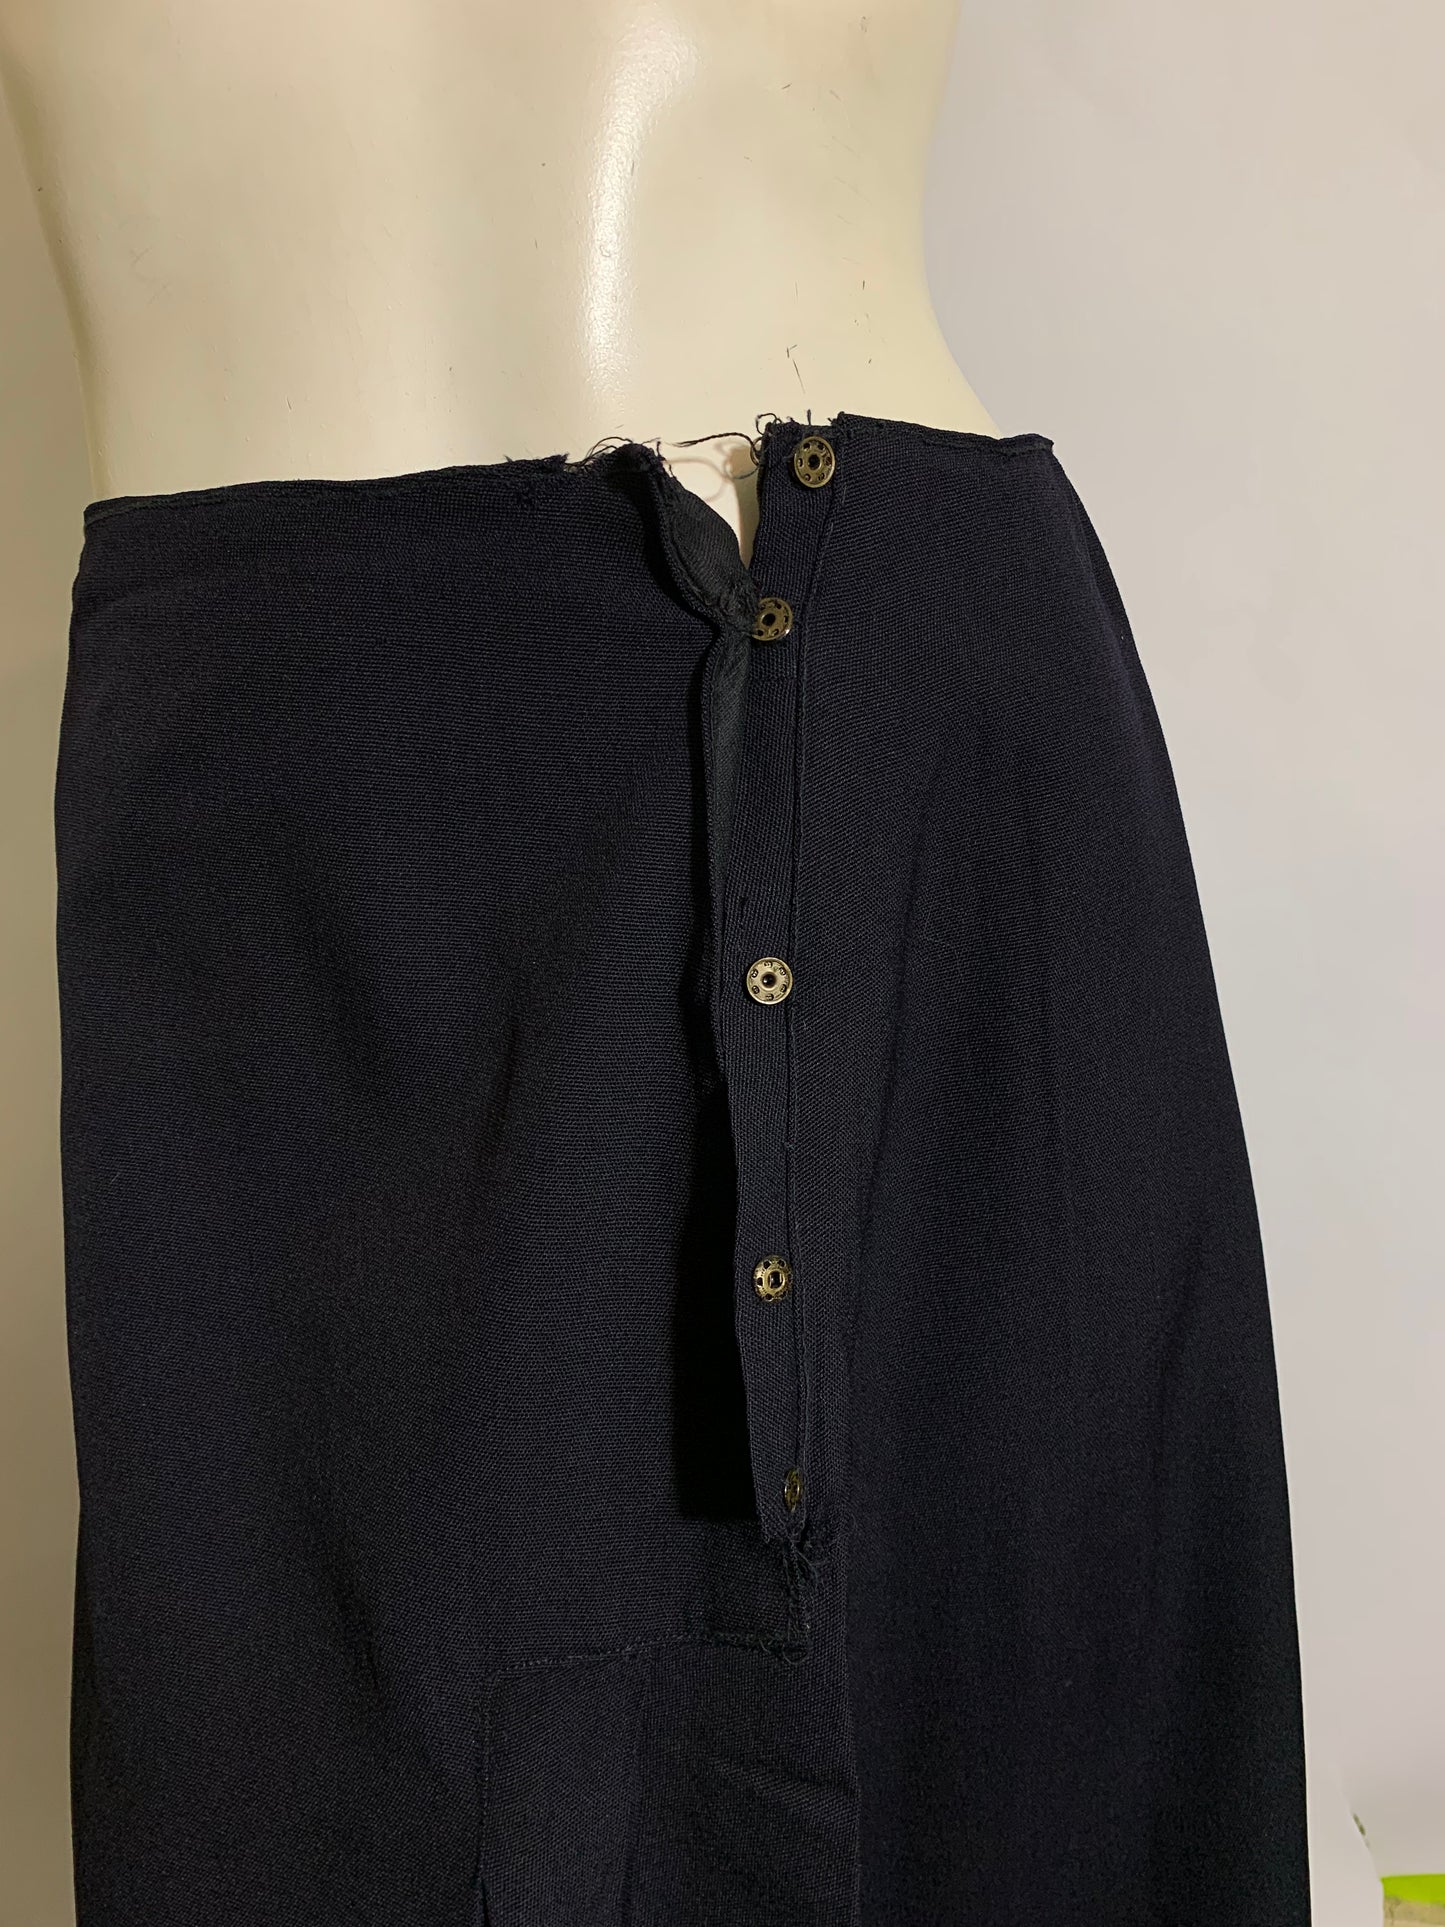 Votes for Women! Deep Blue Wool 2 Pc Walking Suit Dress with Velvet and Silk Accents circa 1910s